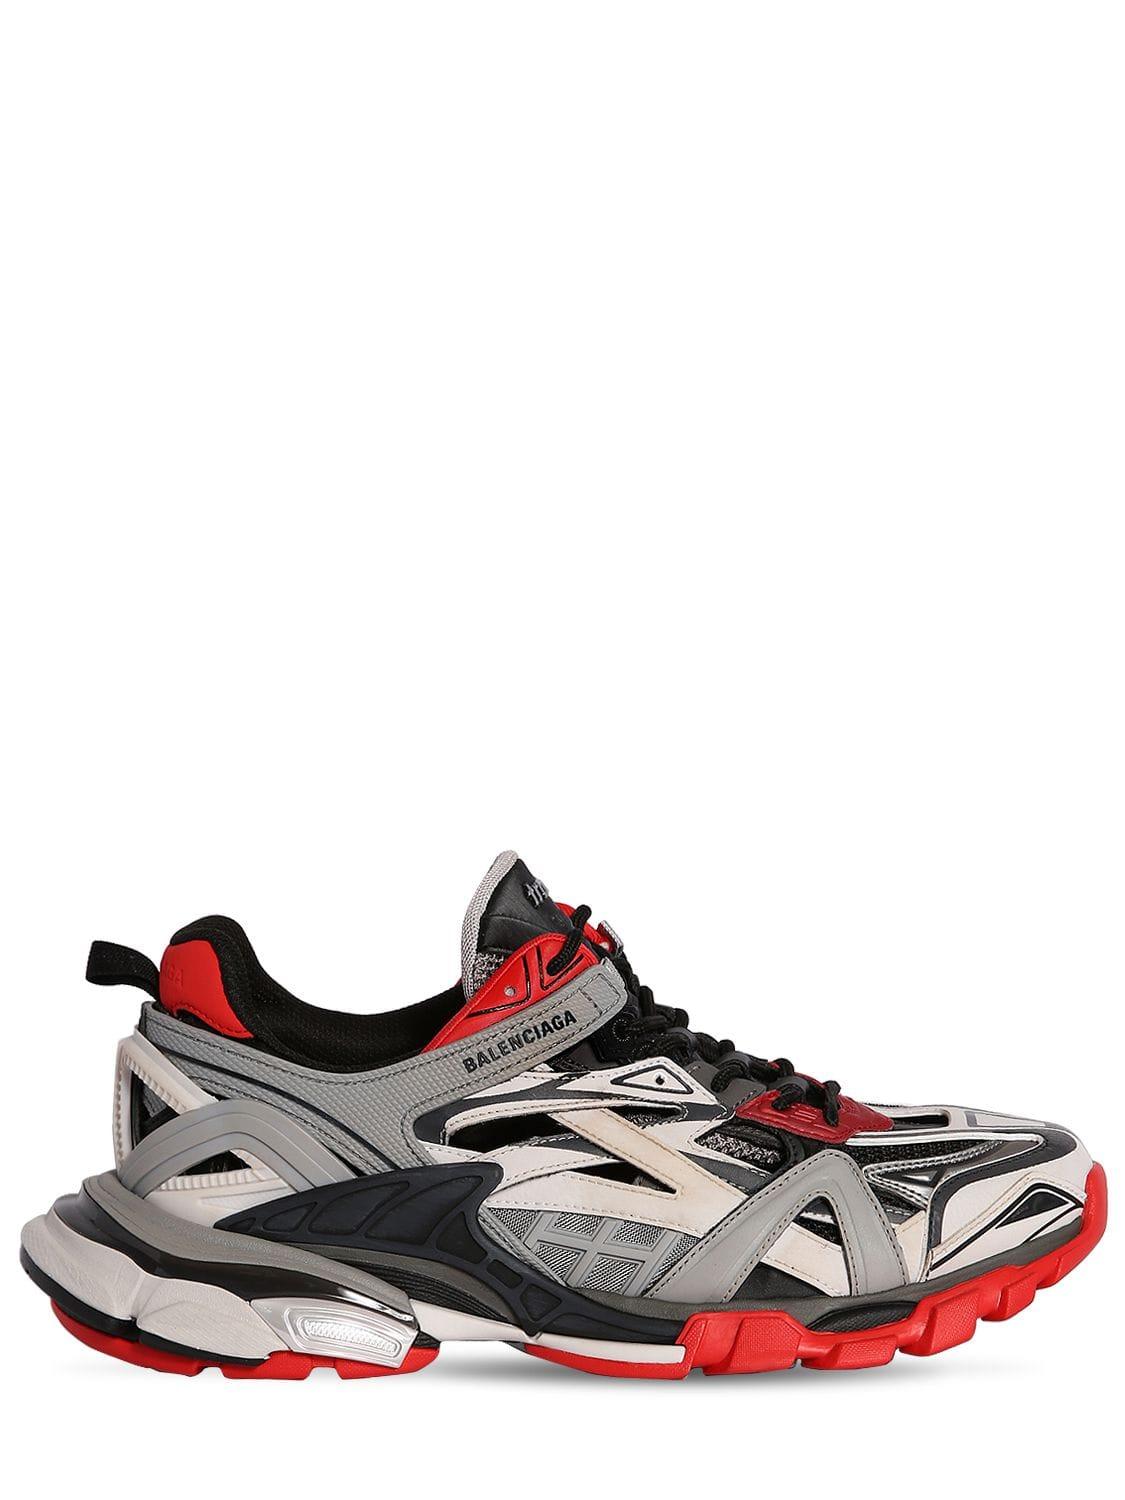 Balenciaga Track.2 Open Mesh Running Sneakers in Grey/Red (Gray) for ...